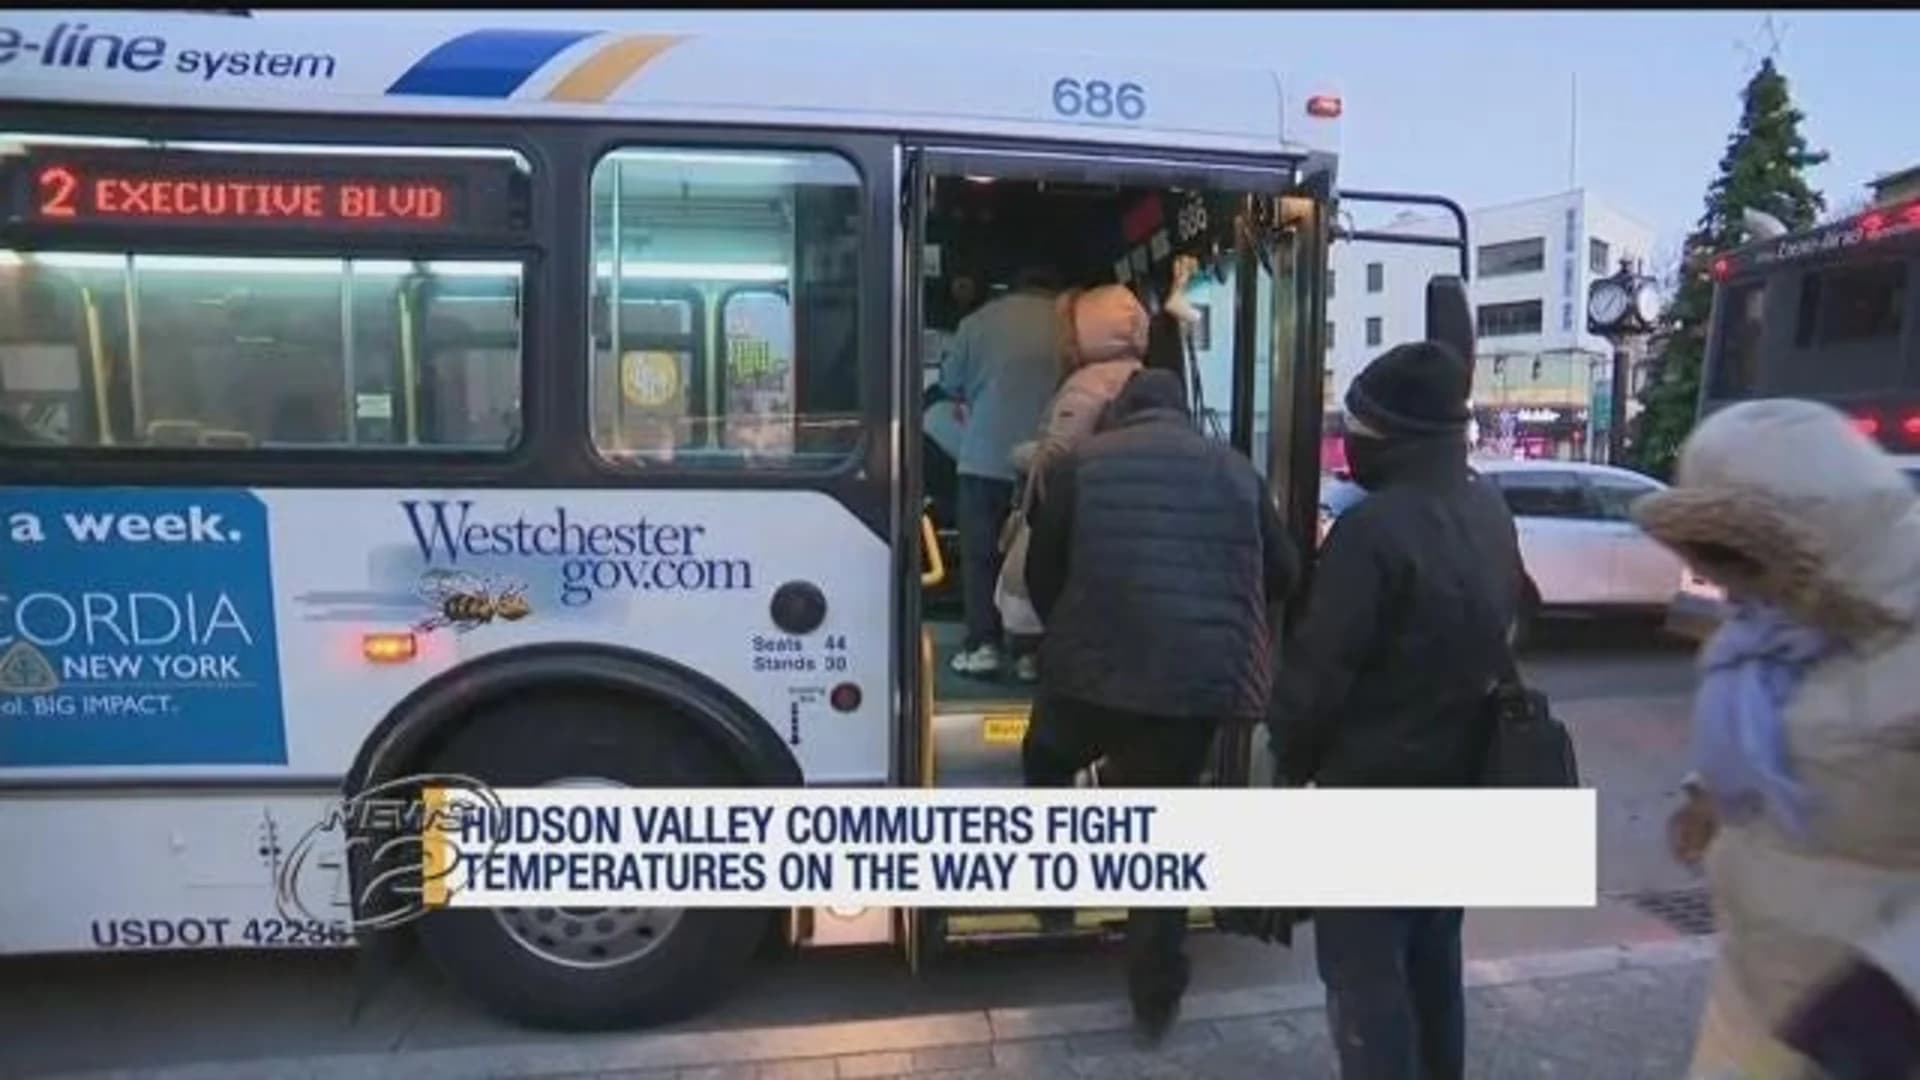 Cold weather becomes dangerous for commuters